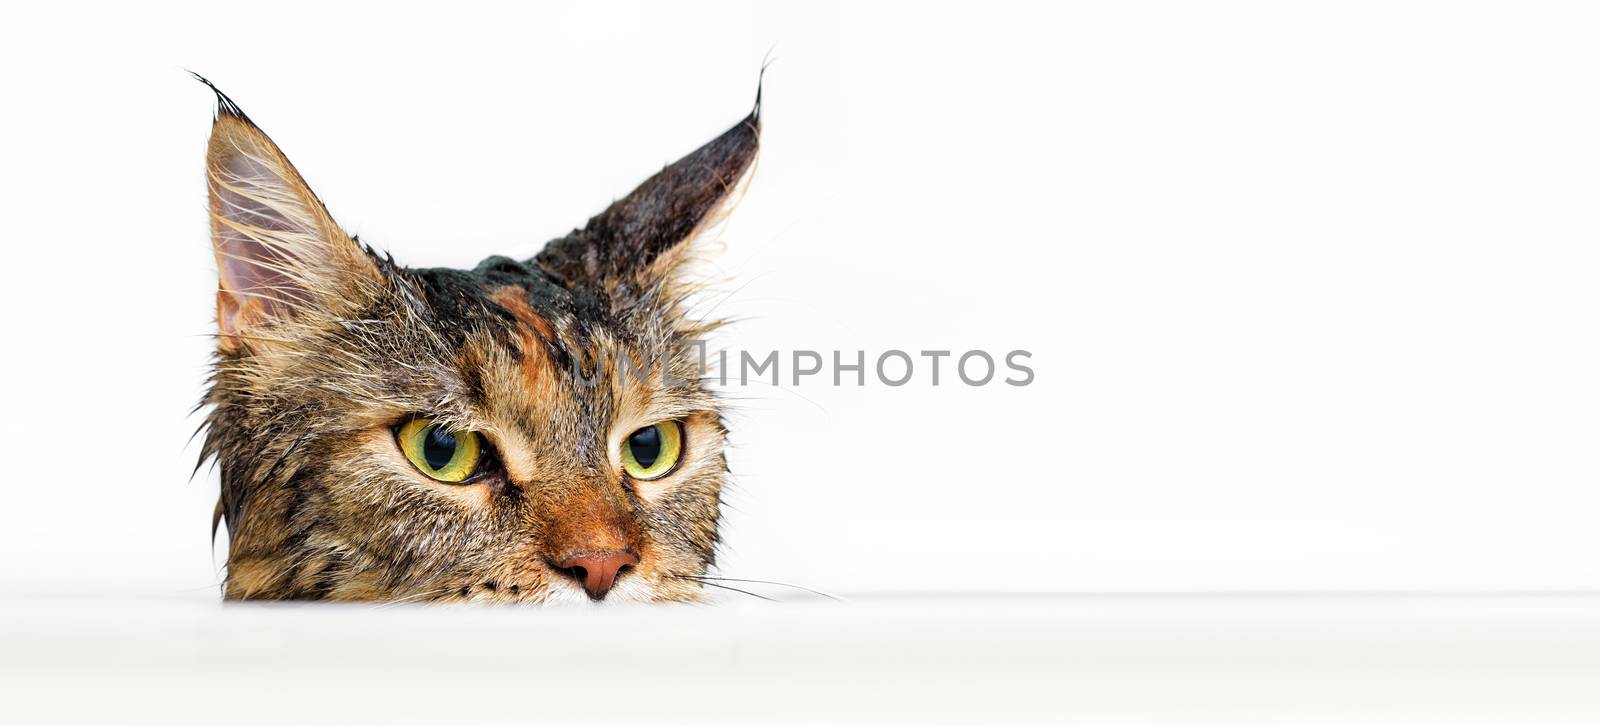 Funny cat Maine Coon. Peeping Cat on white background.